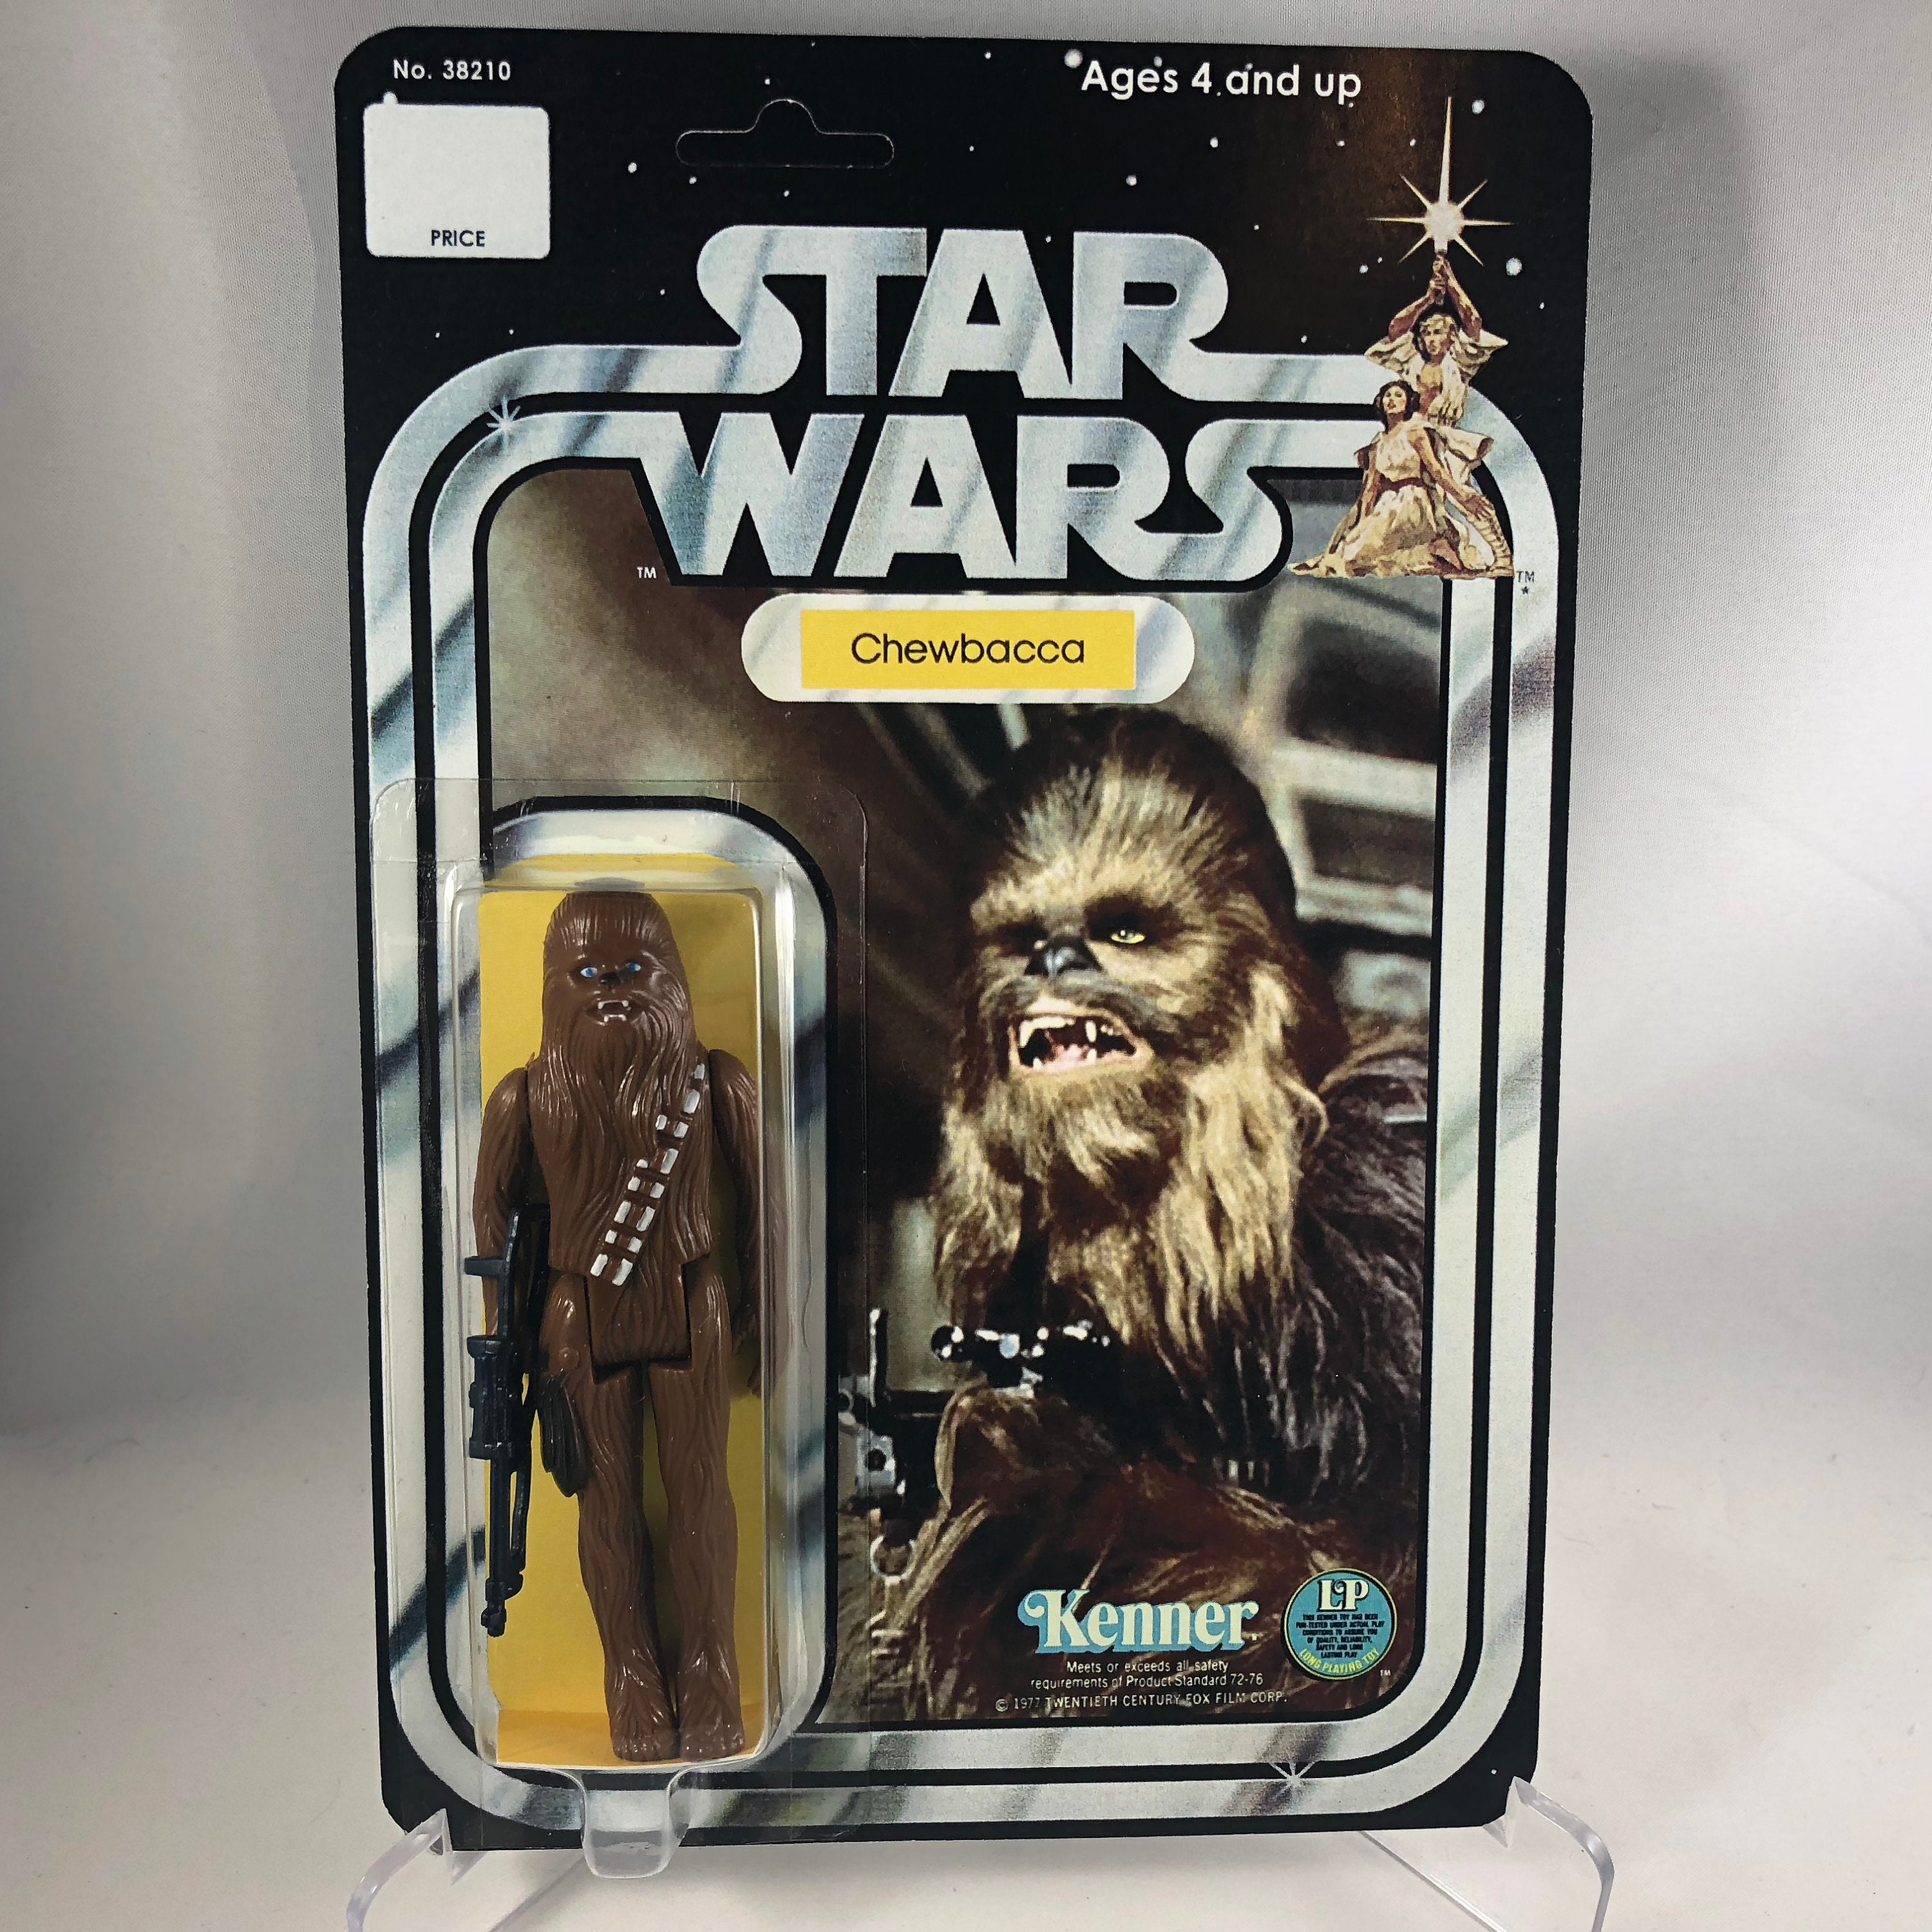 STAR WARS Chewbacca Reproduction Kenner Cardback 1977 